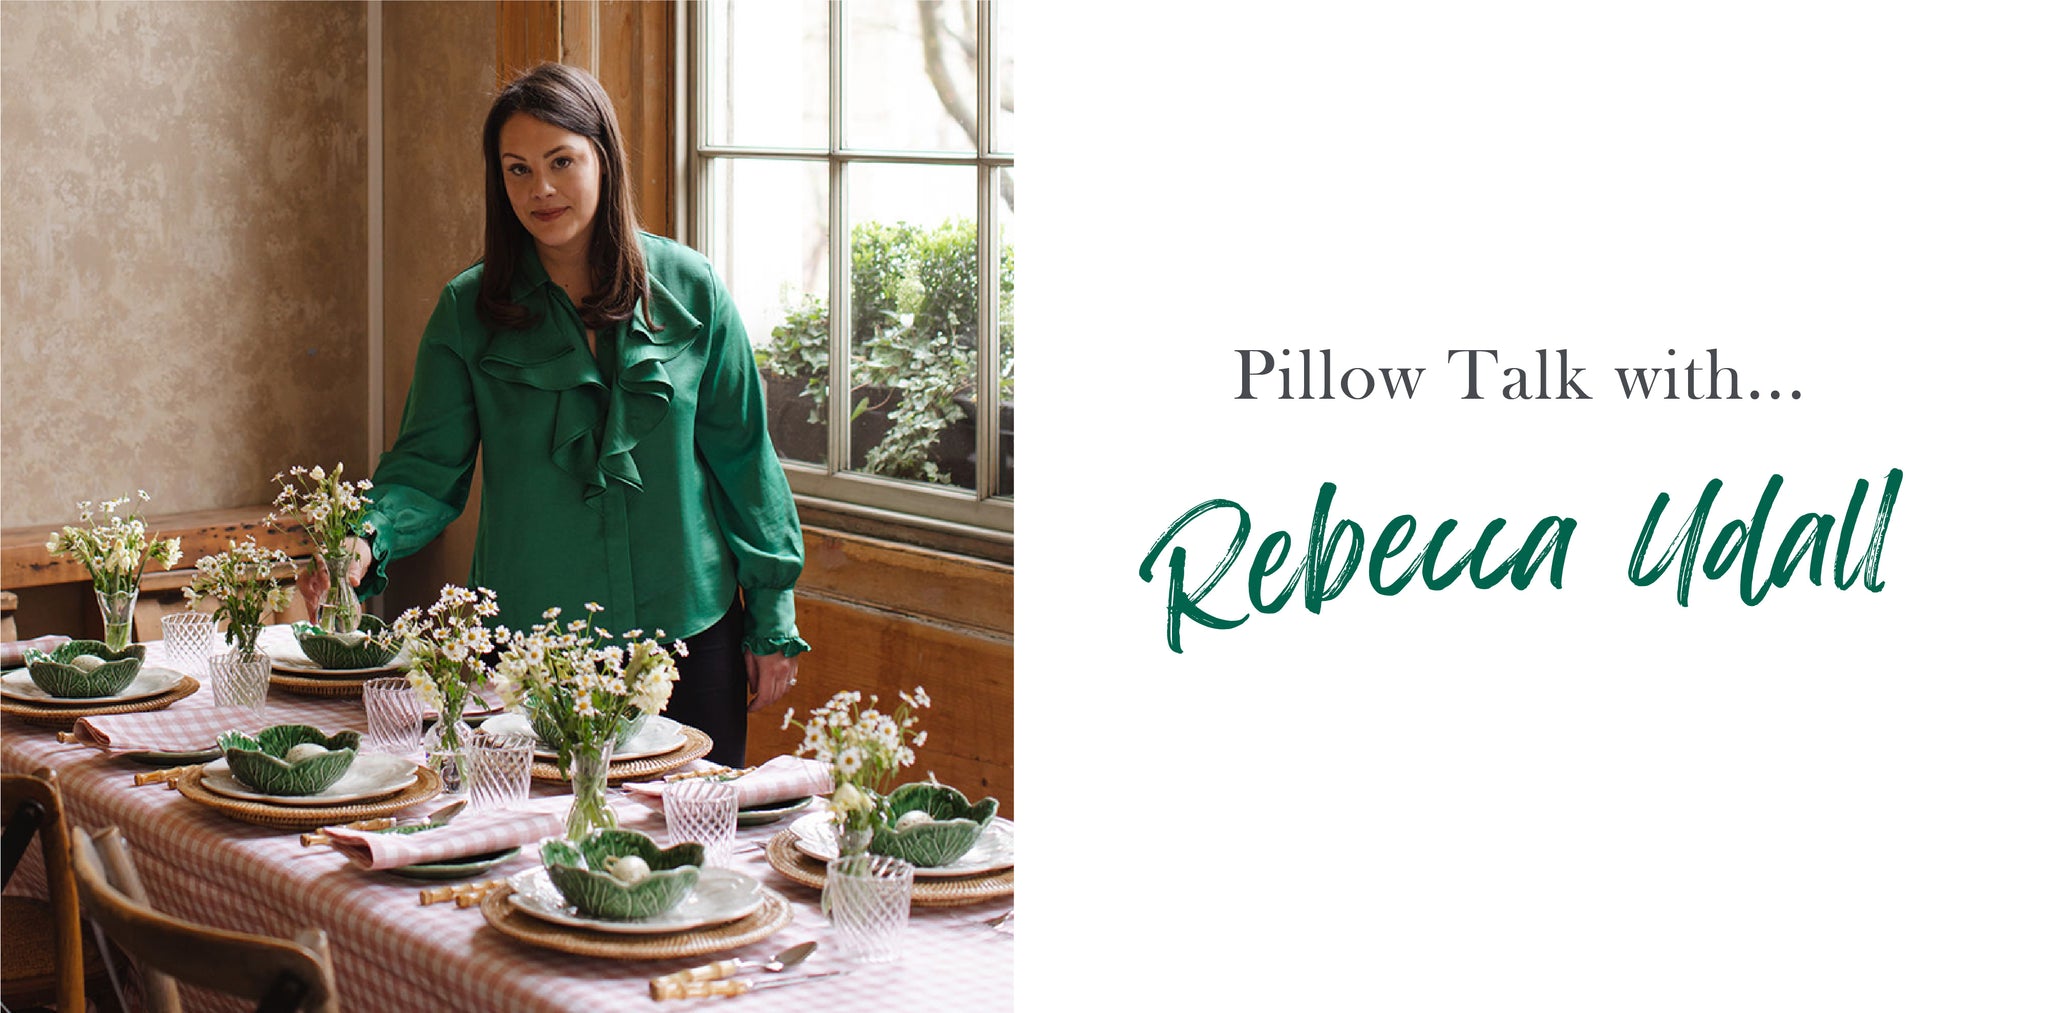 Pillow Talk with... Rebecca Udall